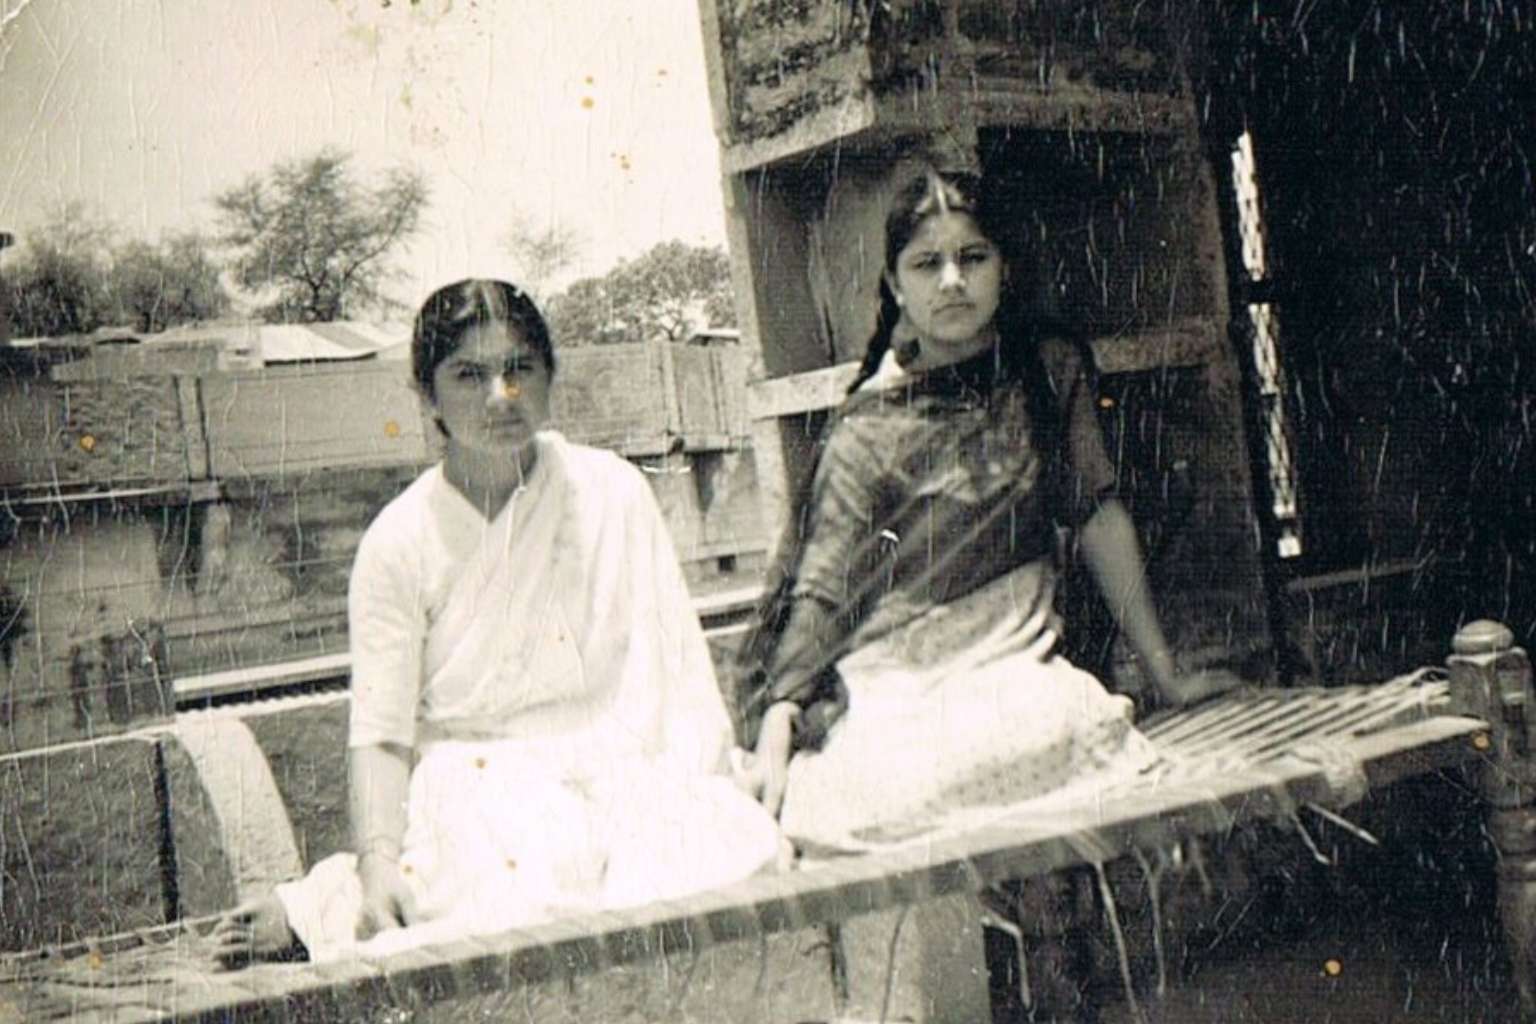 black and white very old photograph of two young women wearing Indian clothing